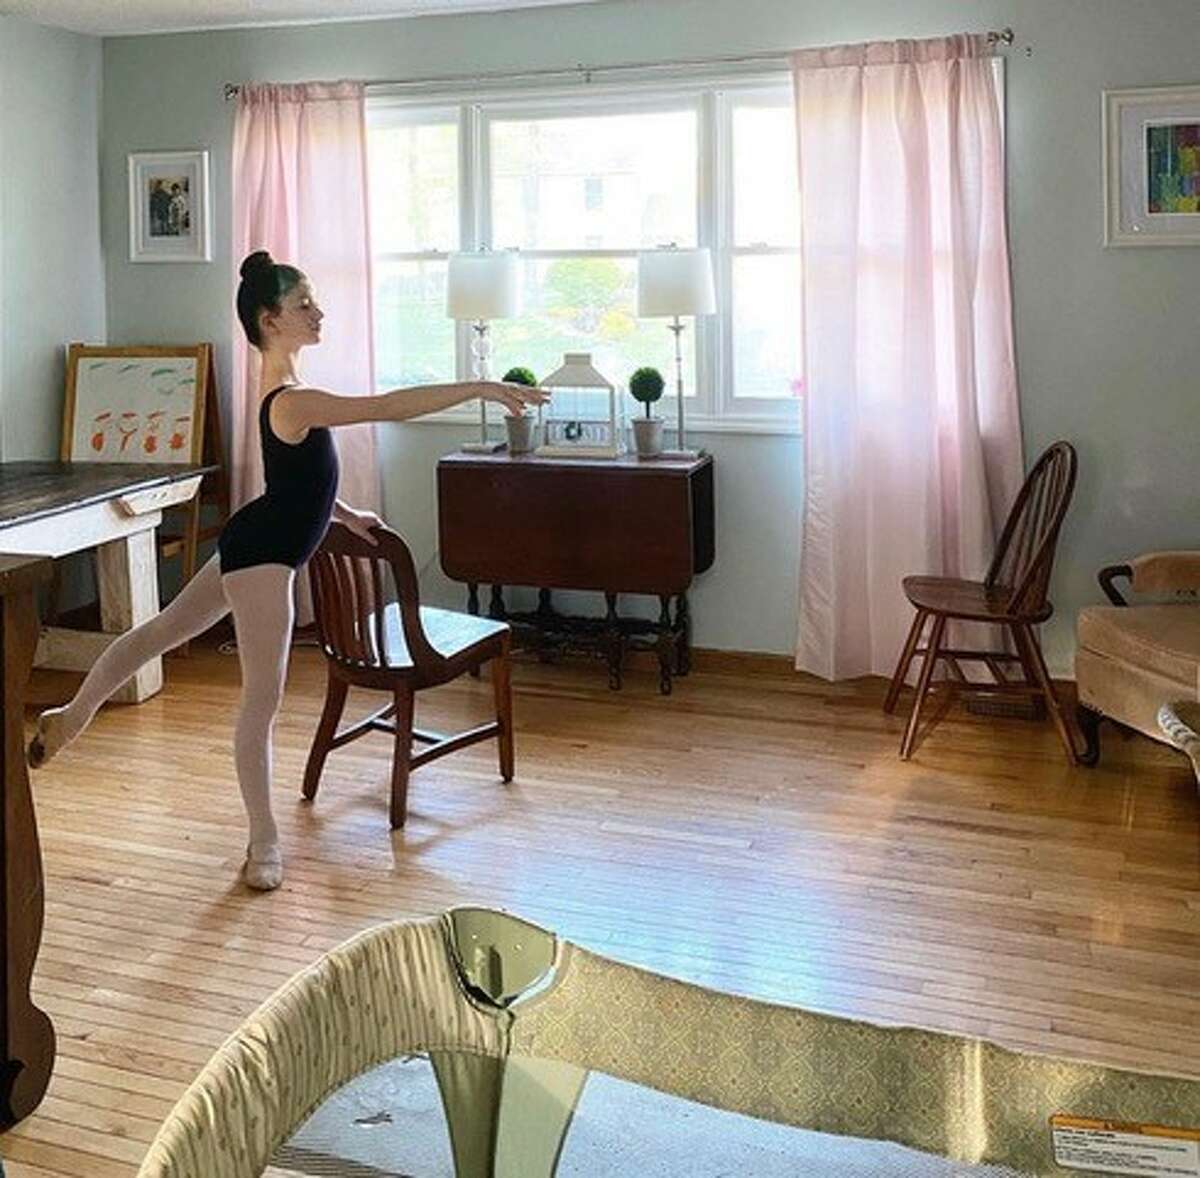 Leven O’Keefe practices in her family's dining room in Schenectady.